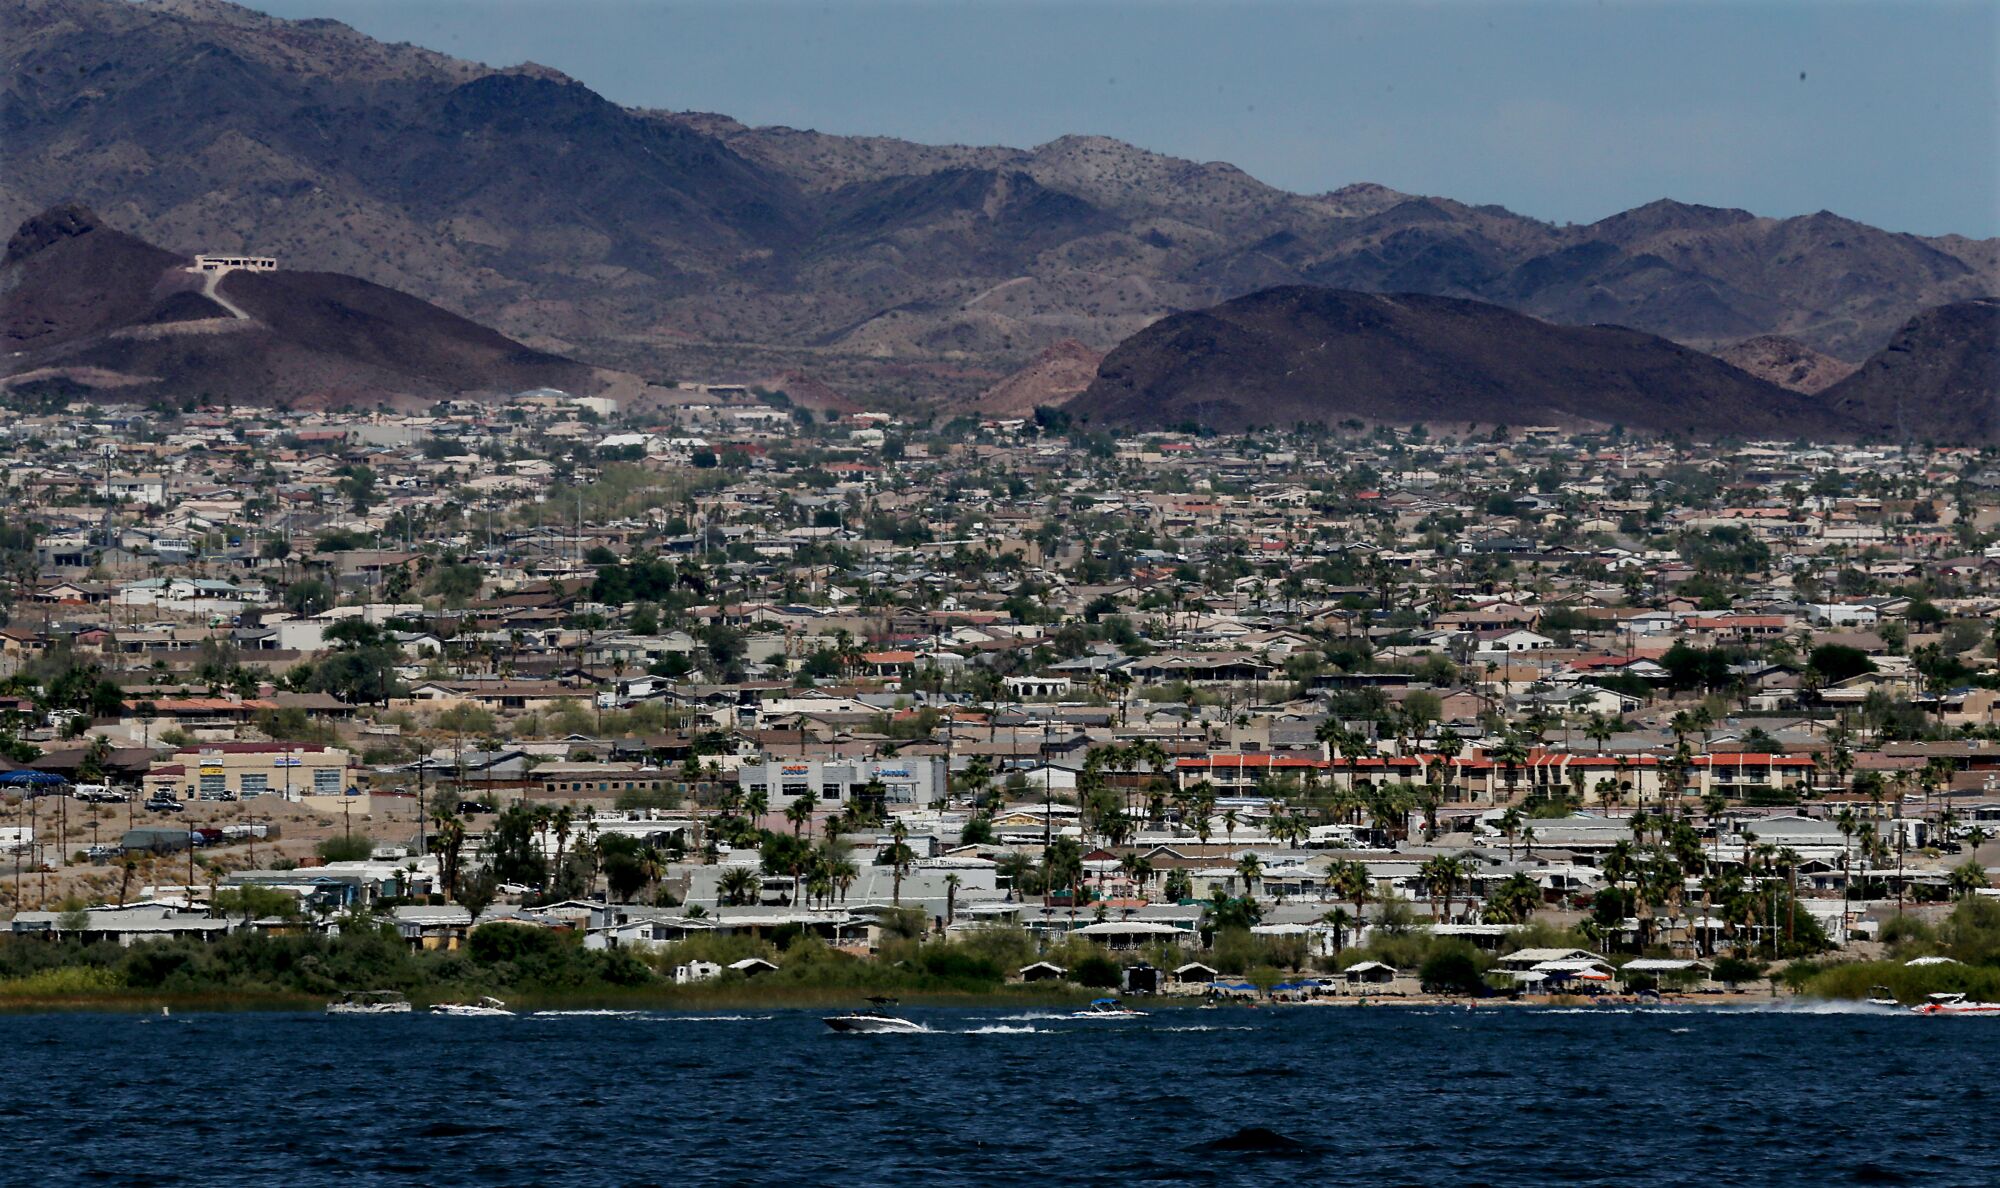 Lake Havasu City stretches from the banks of Lake Havasu to nearby foothills. 